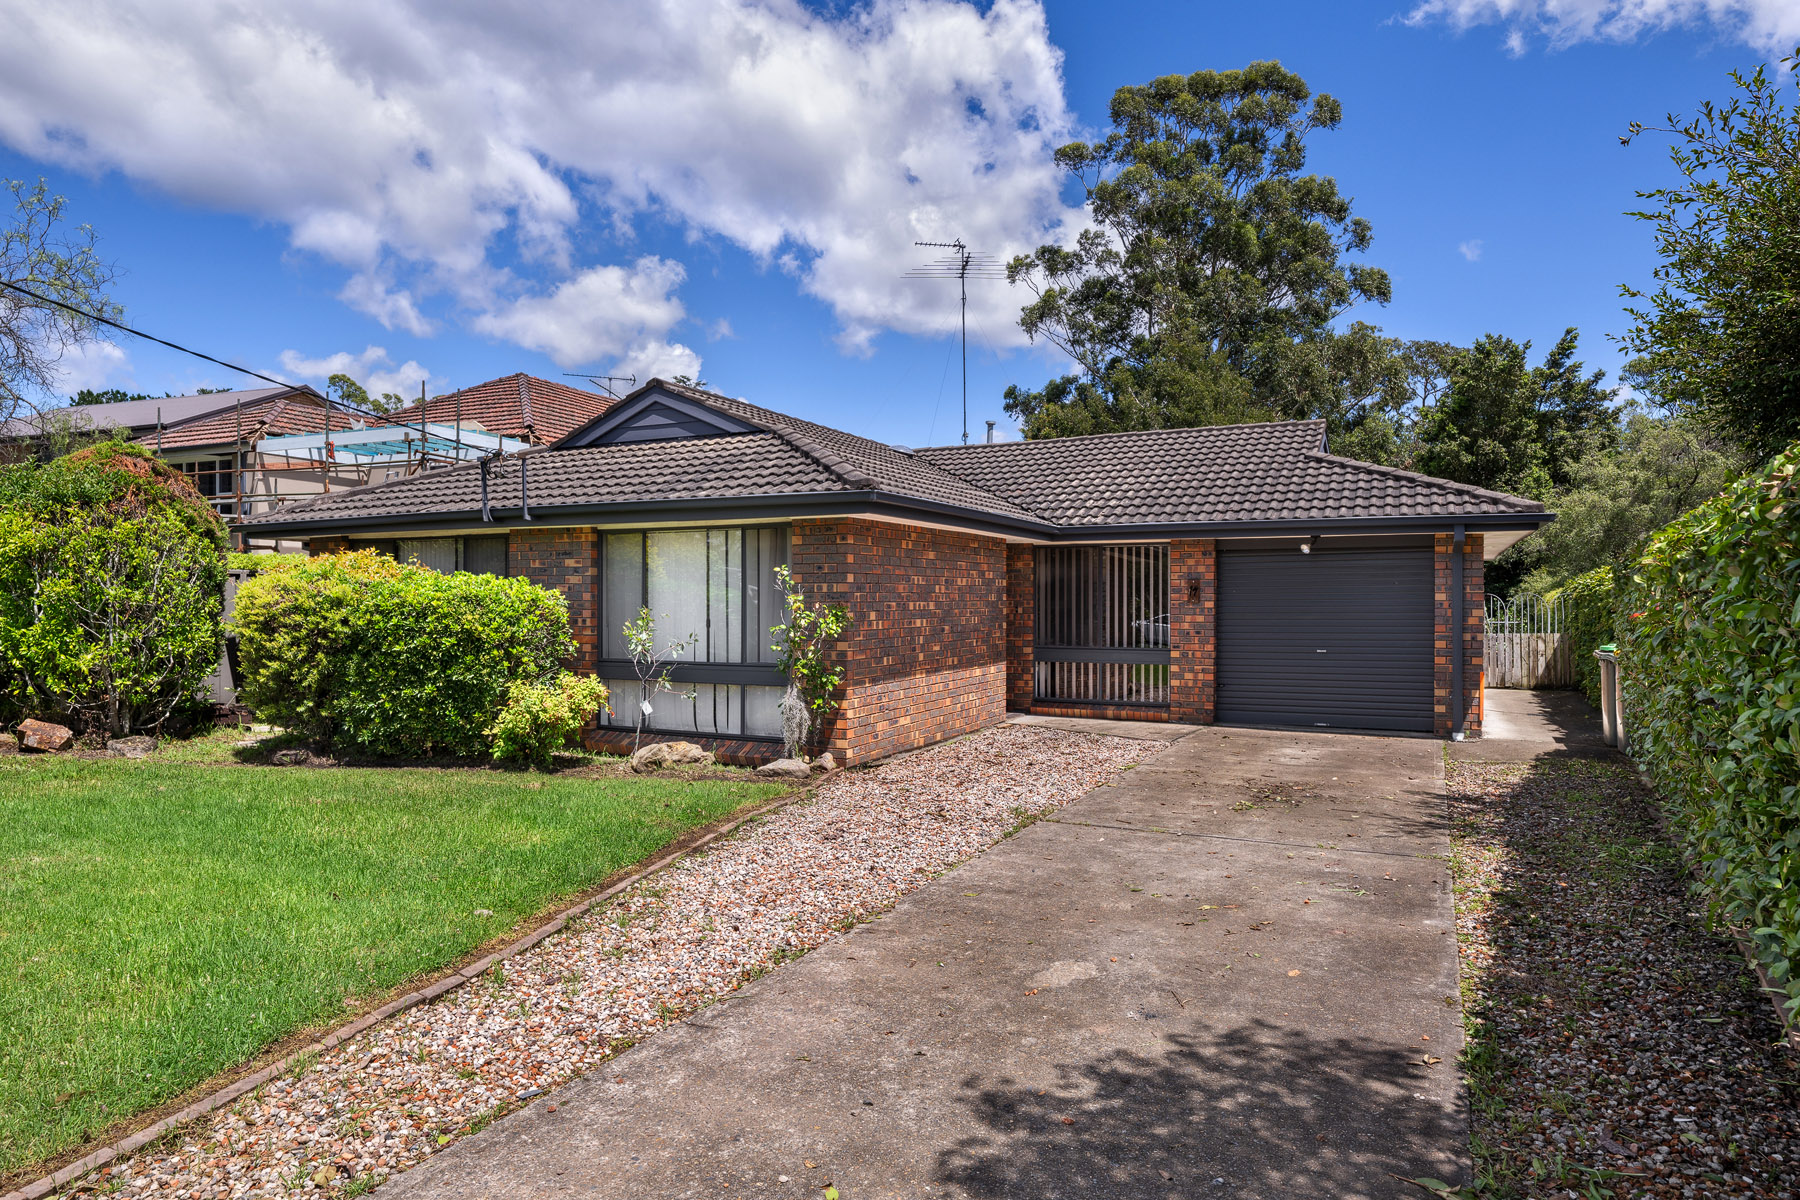 15 Coolabah Road, VALLEY HEIGHTS, NSW 2777 Australia